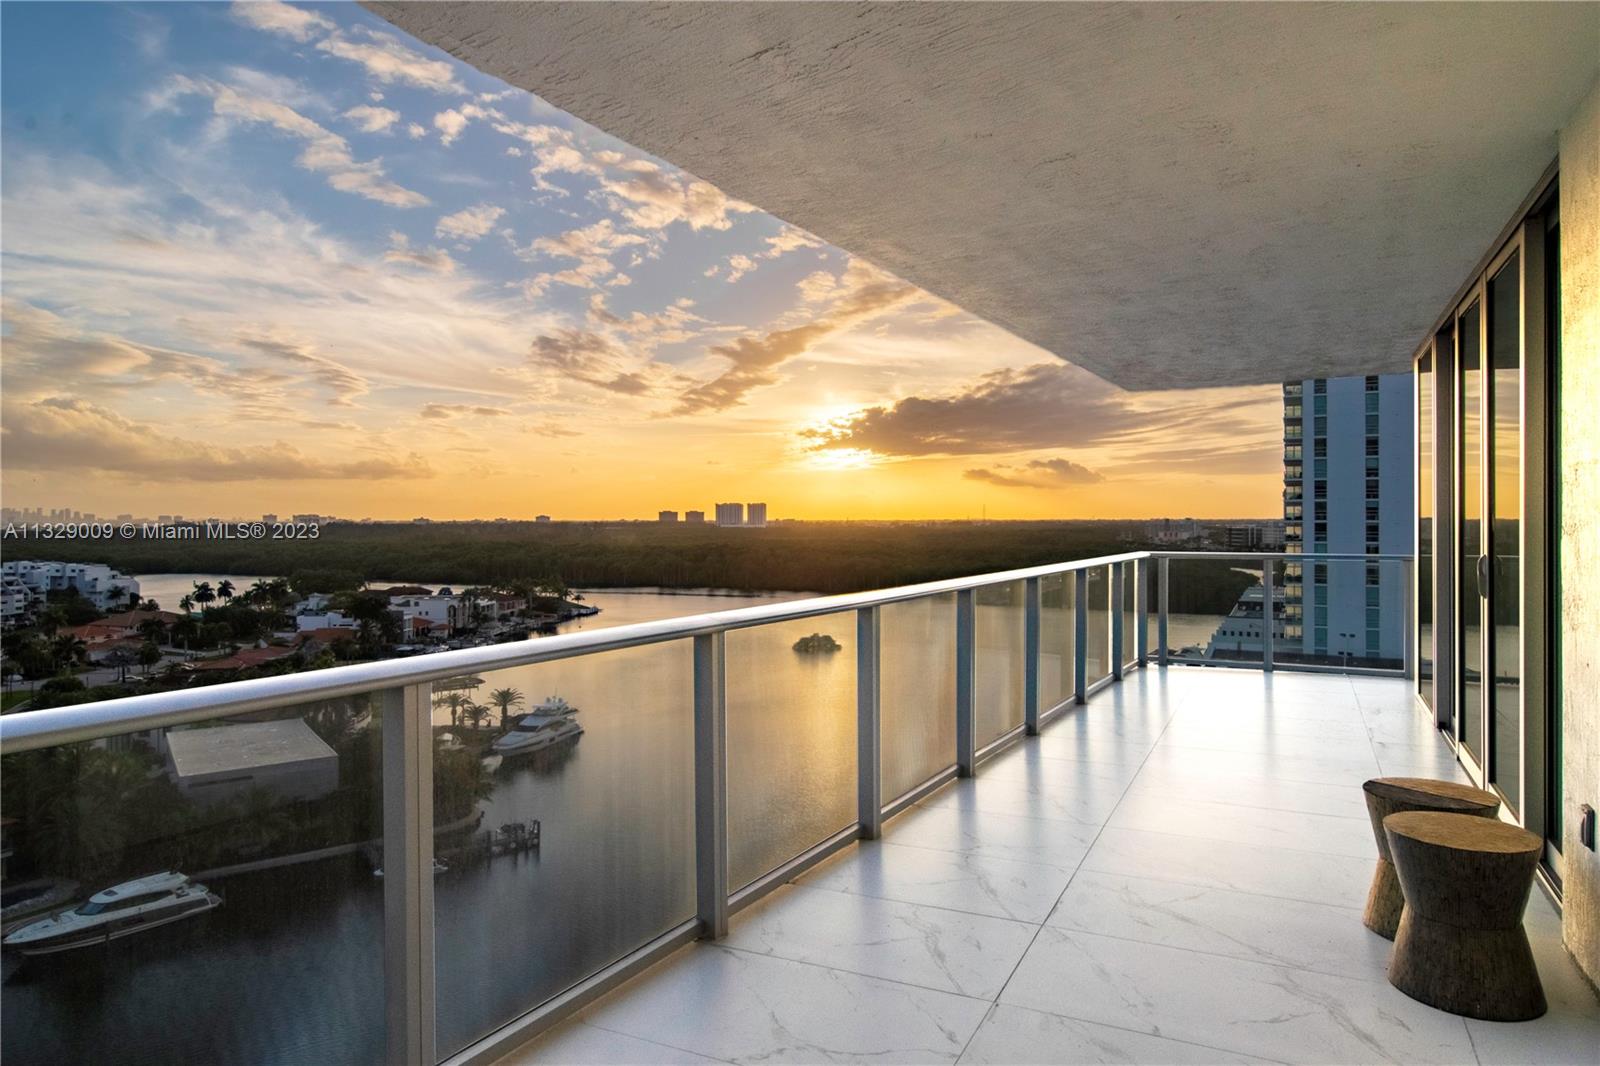 Upscale delight resort living unit at Parque Towers, a 2019 luxury building in Sunny Isles, one block from the beach. Surrounded by boutiques, stores, bistros, cafés and entertainment, it also offers physical fitness and wellness programs, professional housekeeping service, valet parking, a 6 star concierge, marina and private beach club. Amenities include a dedicated pool for kids, resistance pool and a poolside lounge. The unit has been upgraded with California closets, 60x60 ceramic tiles, open kitchen, electric shades in the living room and blackout shades in the bedrooms. Enjoy breathtaking sunsets over Oleta Park and iconic sunrises overlooking the ocean.